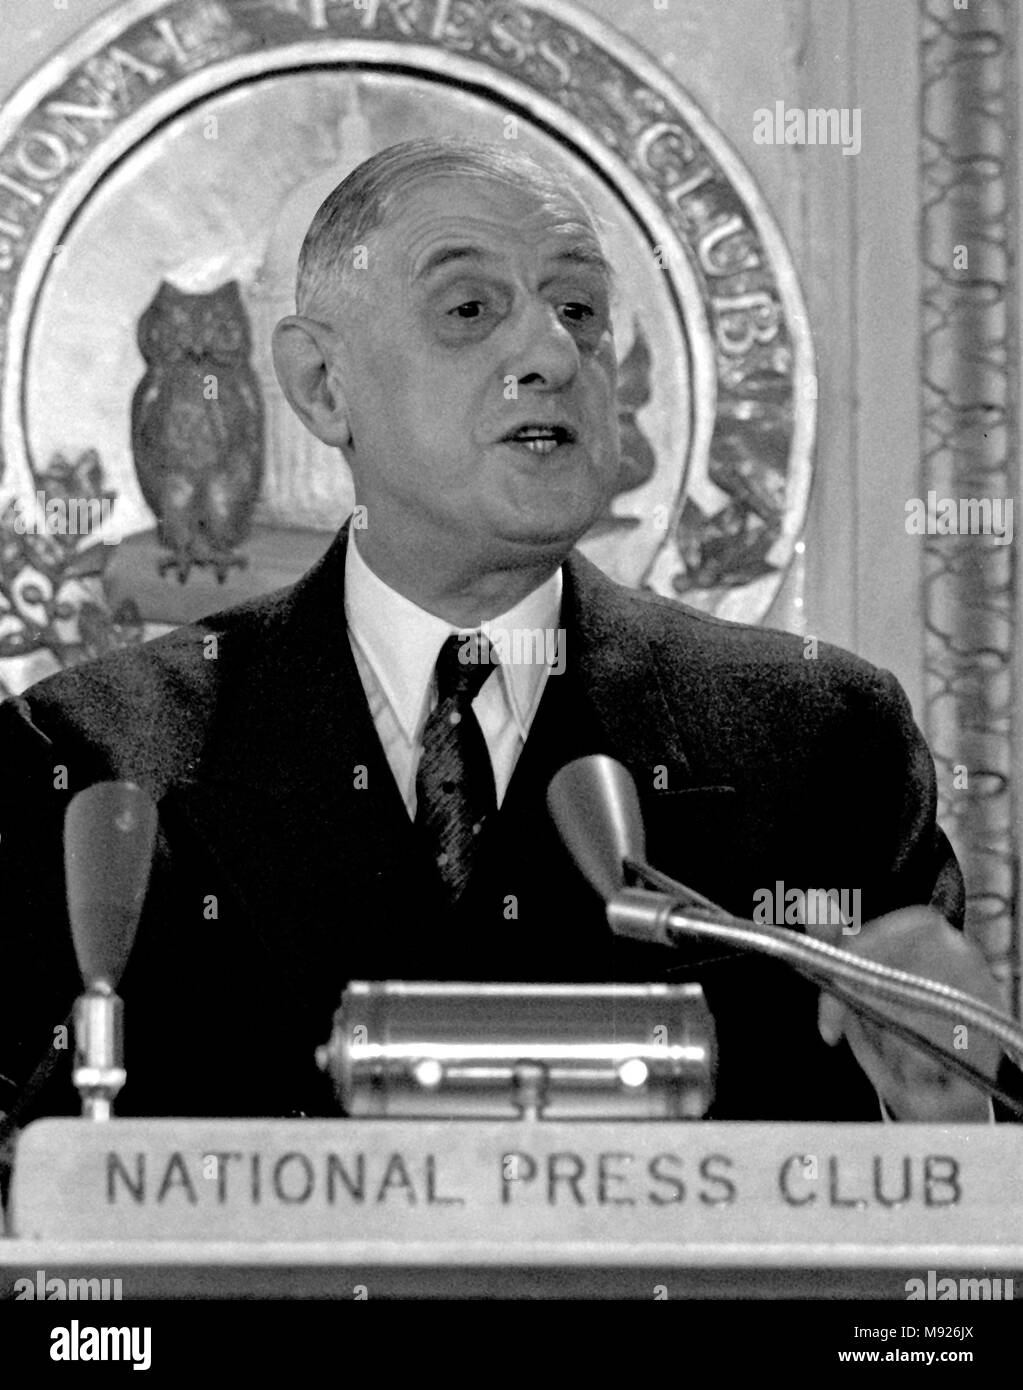 Washington, District of Columbia, USA. 23rd Apr, 1960. President Charles de Gaulle of France speaks at the National Press Club in Washington, DC on April 23, 1960. President de Gaulle is in Washington for a State visit to focus on talks with United States President Dwight D. Eisenhower in anticipation of the upcoming Big Four summit in May in Paris. It will be the first such meeting of leaders from the US, Great Britain, France, and the Soviet Union since World War II.Credit: Benjamin E. ''Gene'' Forte/CNP Credit: Benjamin E. ''Gene'' Forte/CNP/ZUMA Wire/Alamy Live News Stock Photo